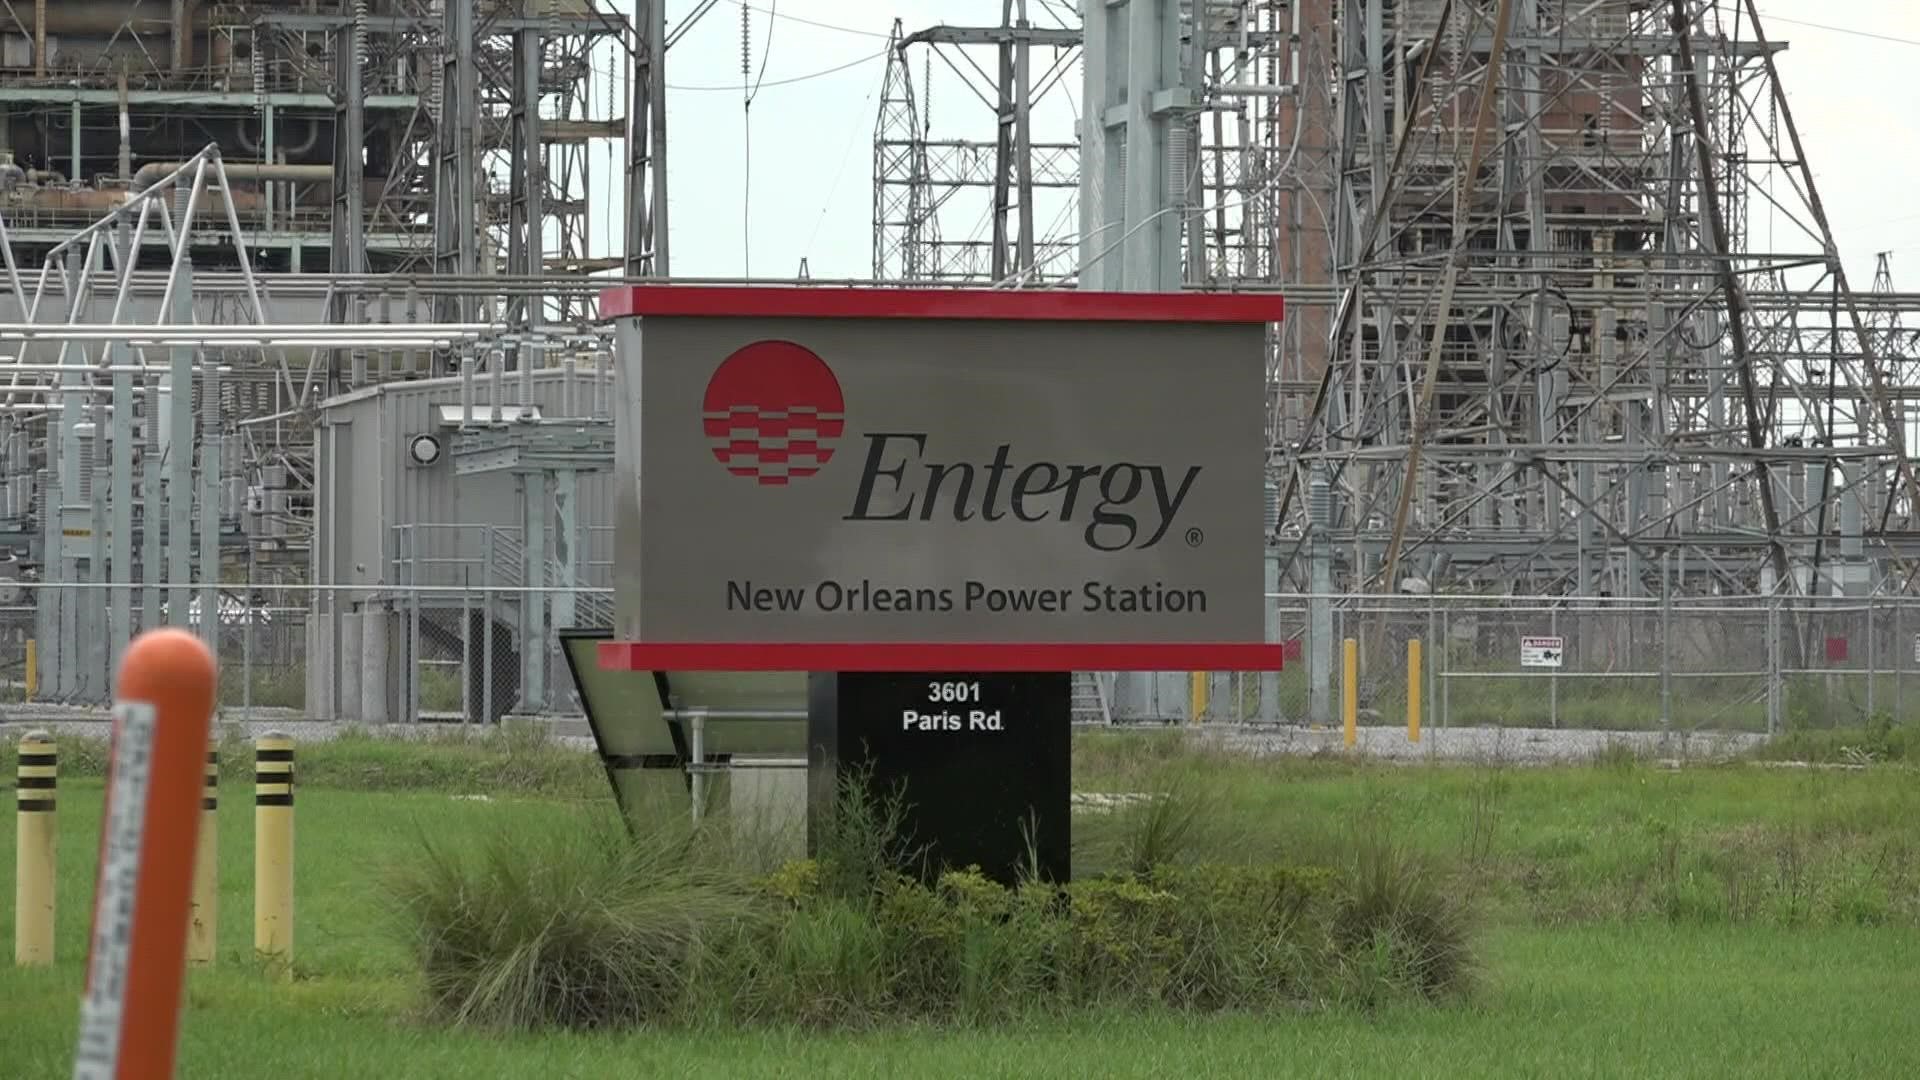 Critics say Entergy's New Orleans plant did not work  as it should have. David Hammer investigates.